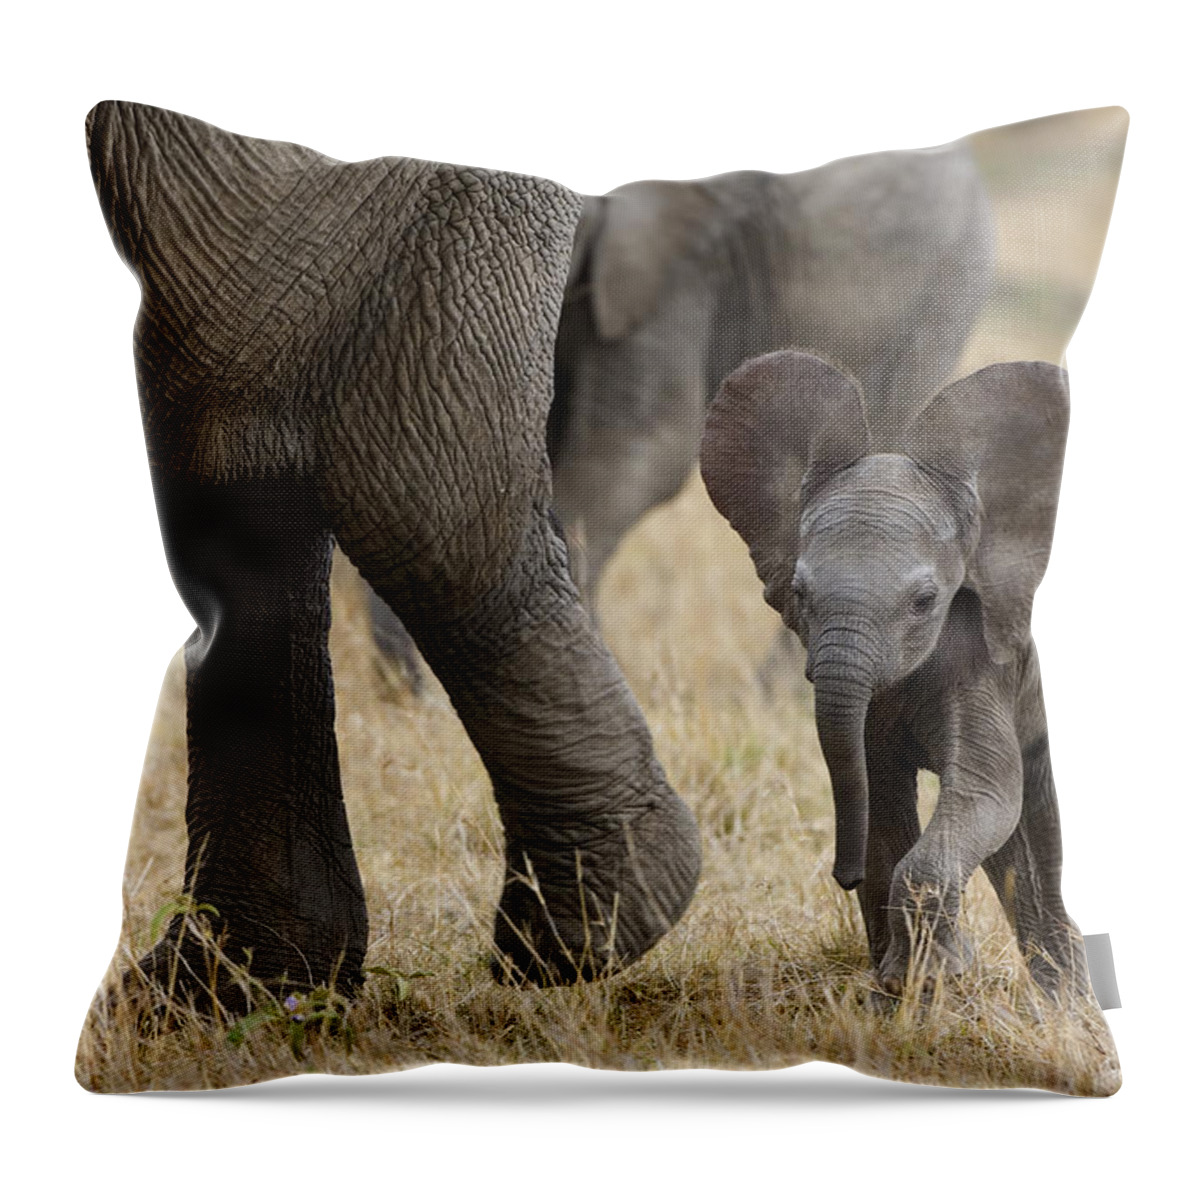 00784043 Throw Pillow featuring the photograph African Elephant Mother And Under 3 by Suzi Eszterhas